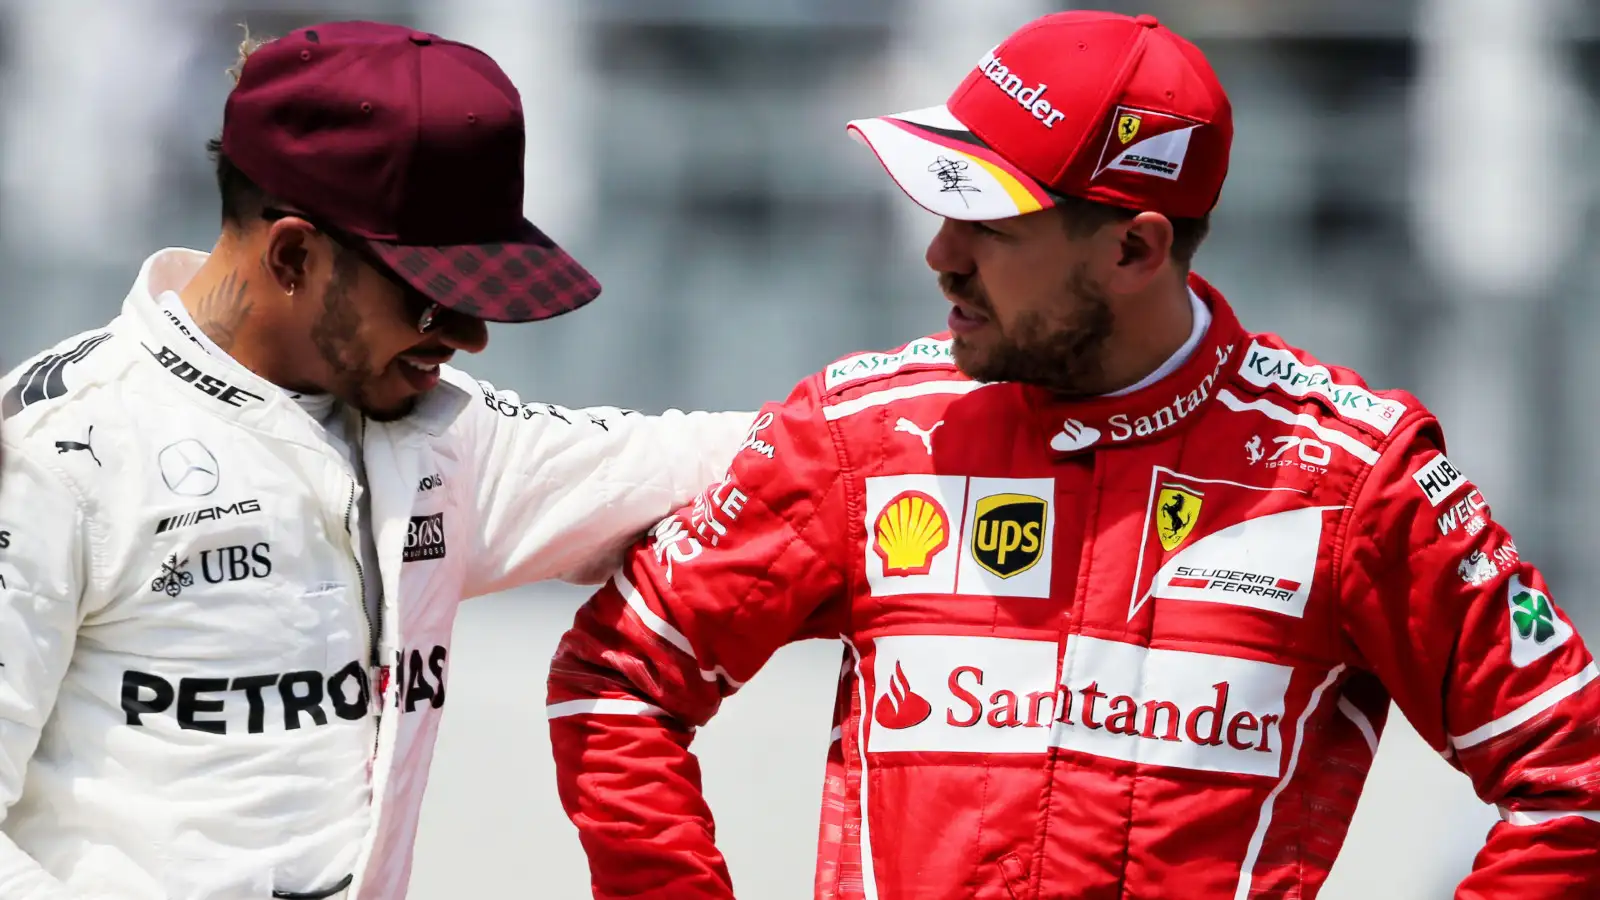 Title rivals on-track, friends off-track, Lewis Hamilton and Sebastian Vettel pictured together in 2018.